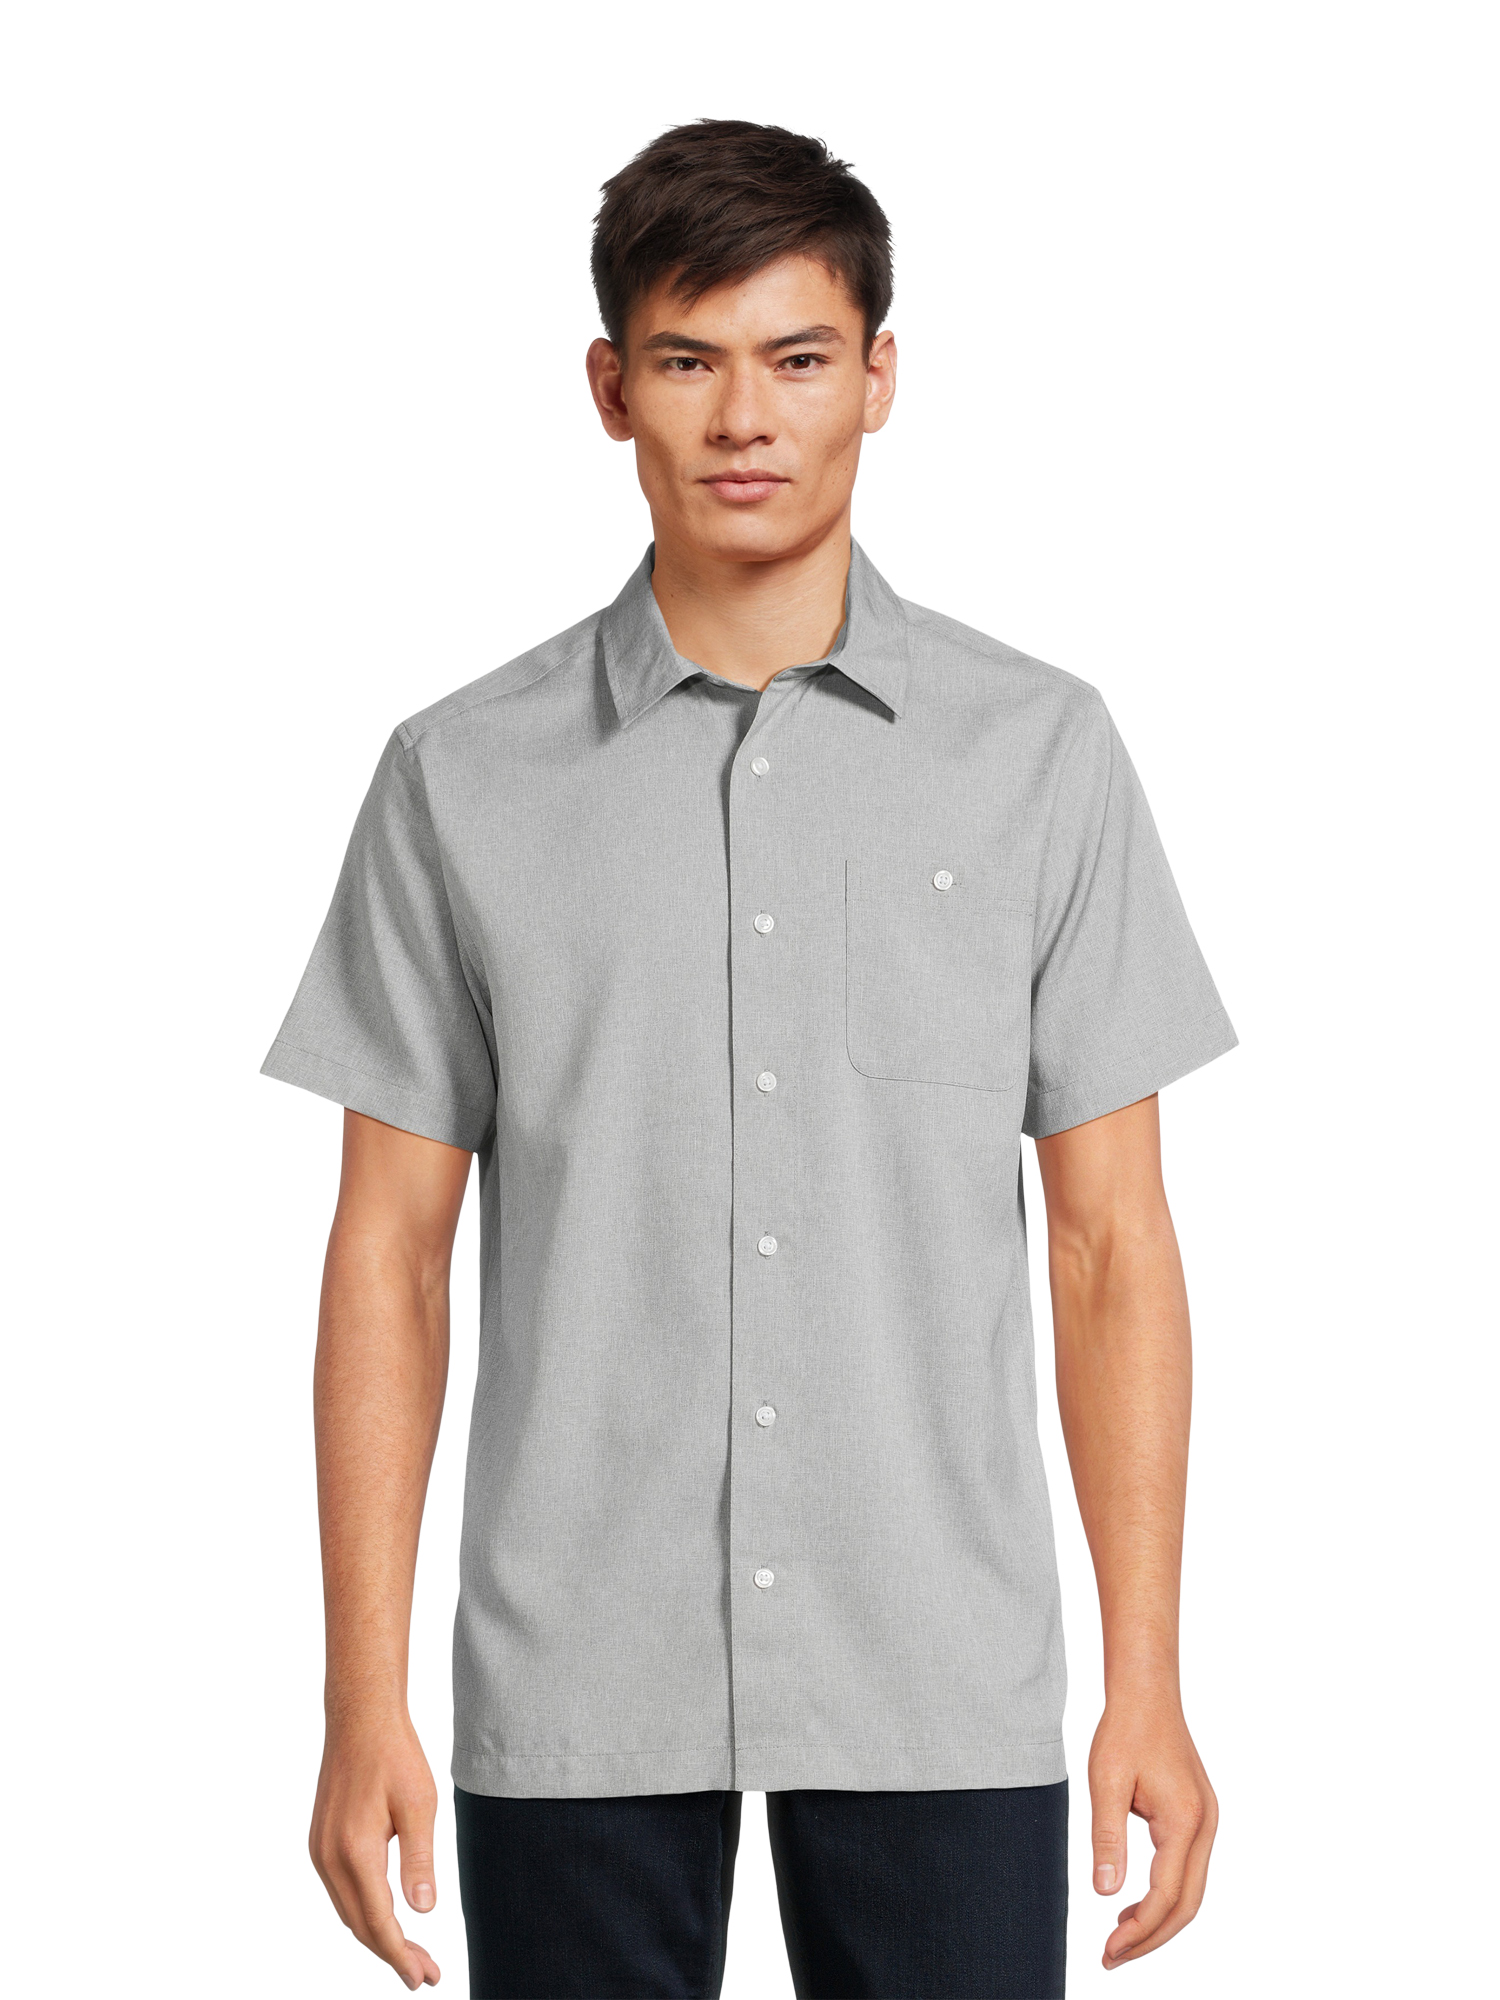 George Men's & Big Men's Lightwieght Button-Up Shirt with Short Sleeves ...